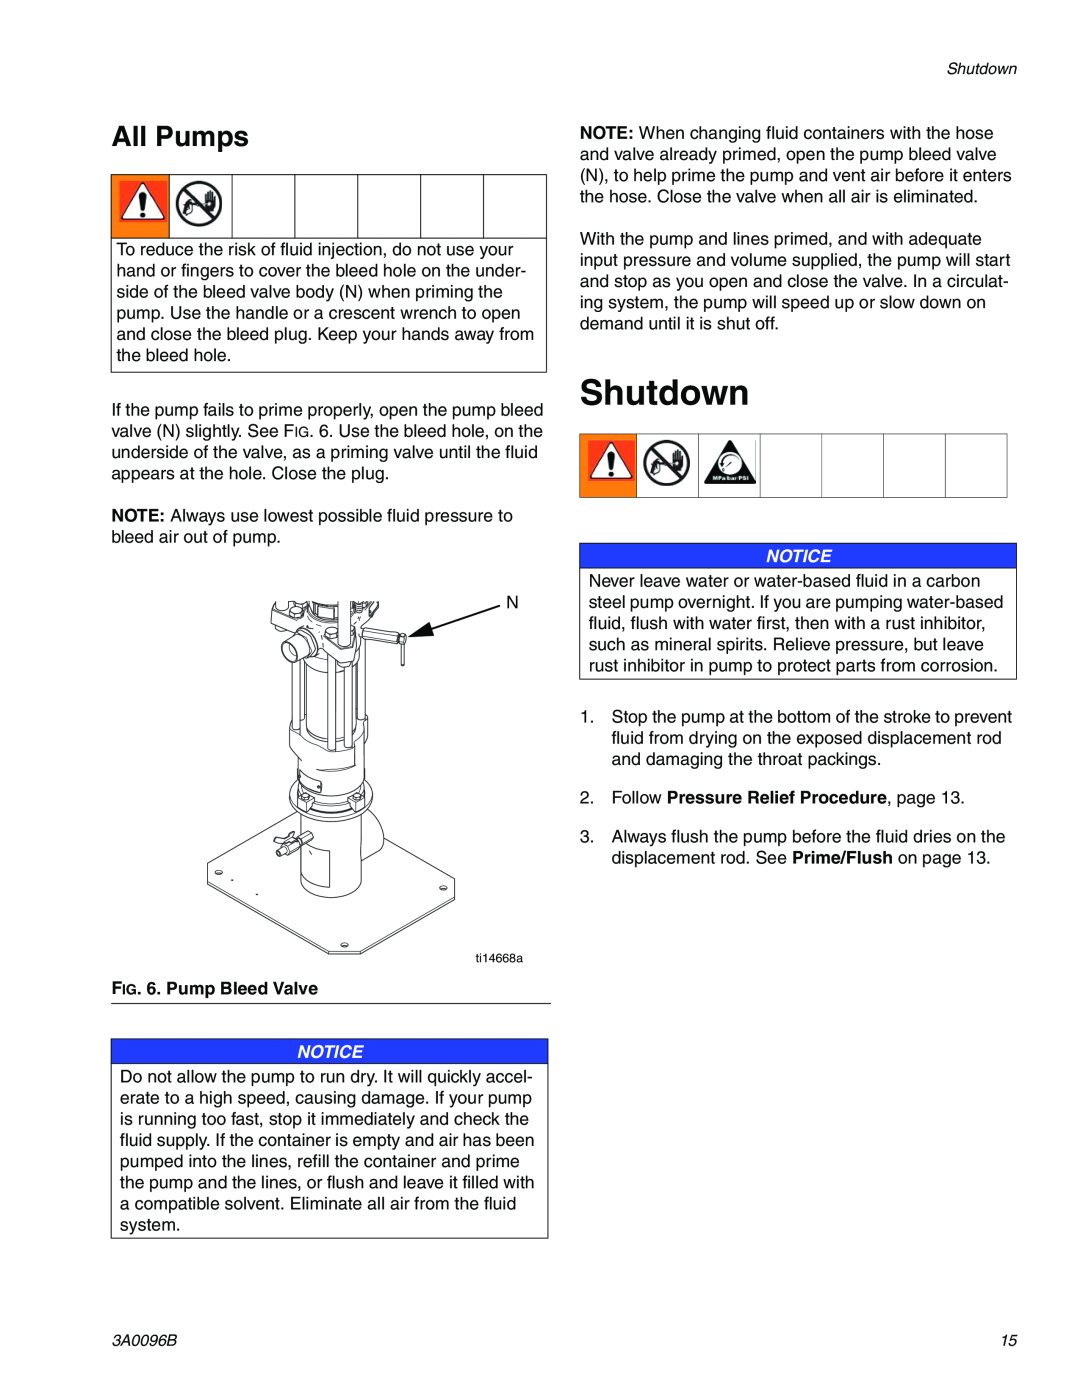 Graco 3A0096B important safety instructions Shutdown, All Pumps 